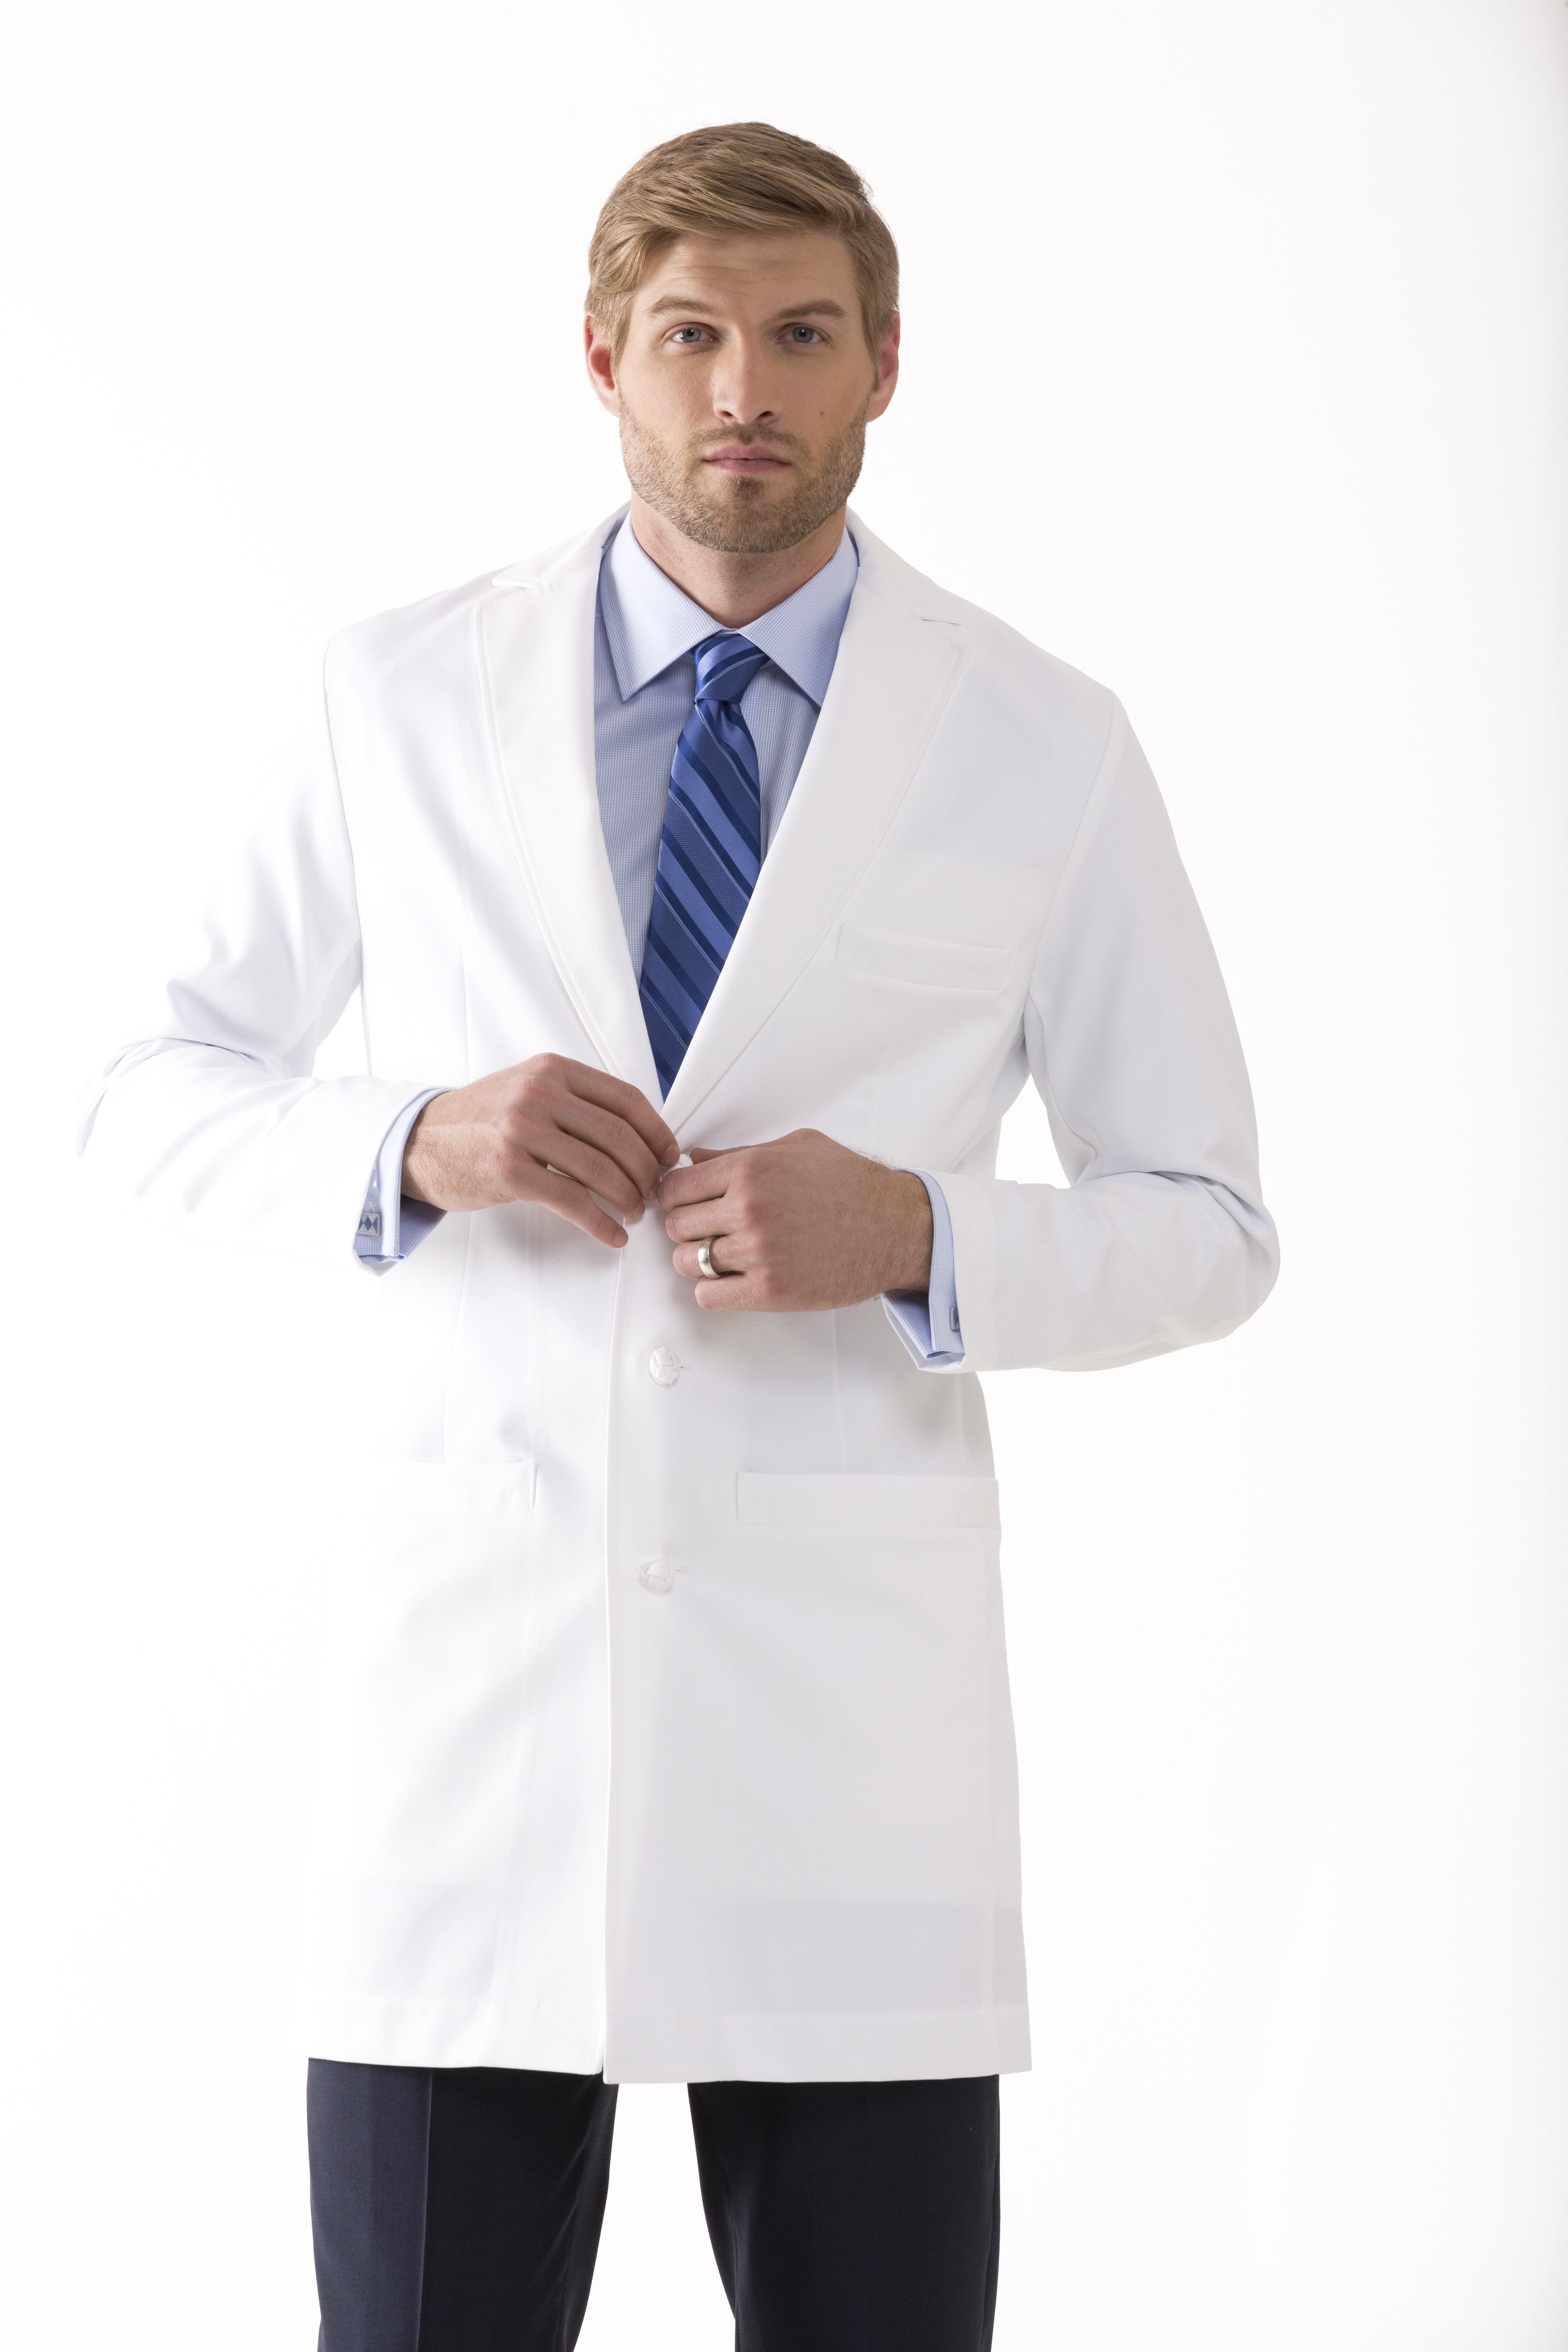 007 A Leading Lab Coat For A Leading Physician Medelita [ 3840 x 5760 Pixel ]